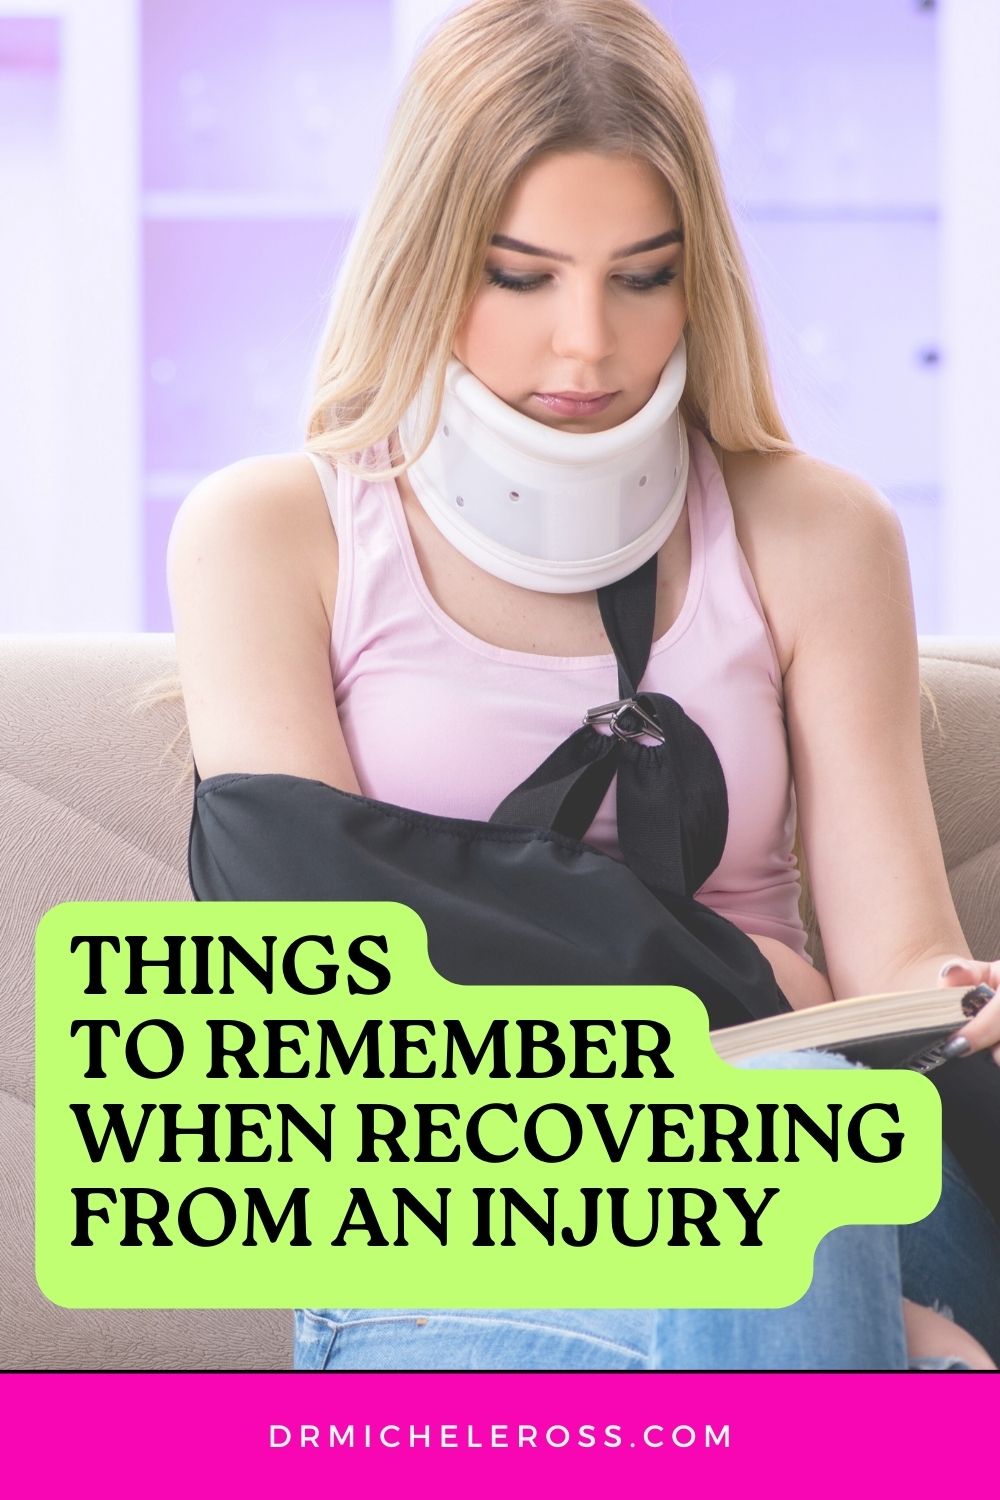 young woman in neck brace and arm cast injured recovering from car accident injury pinterest pin